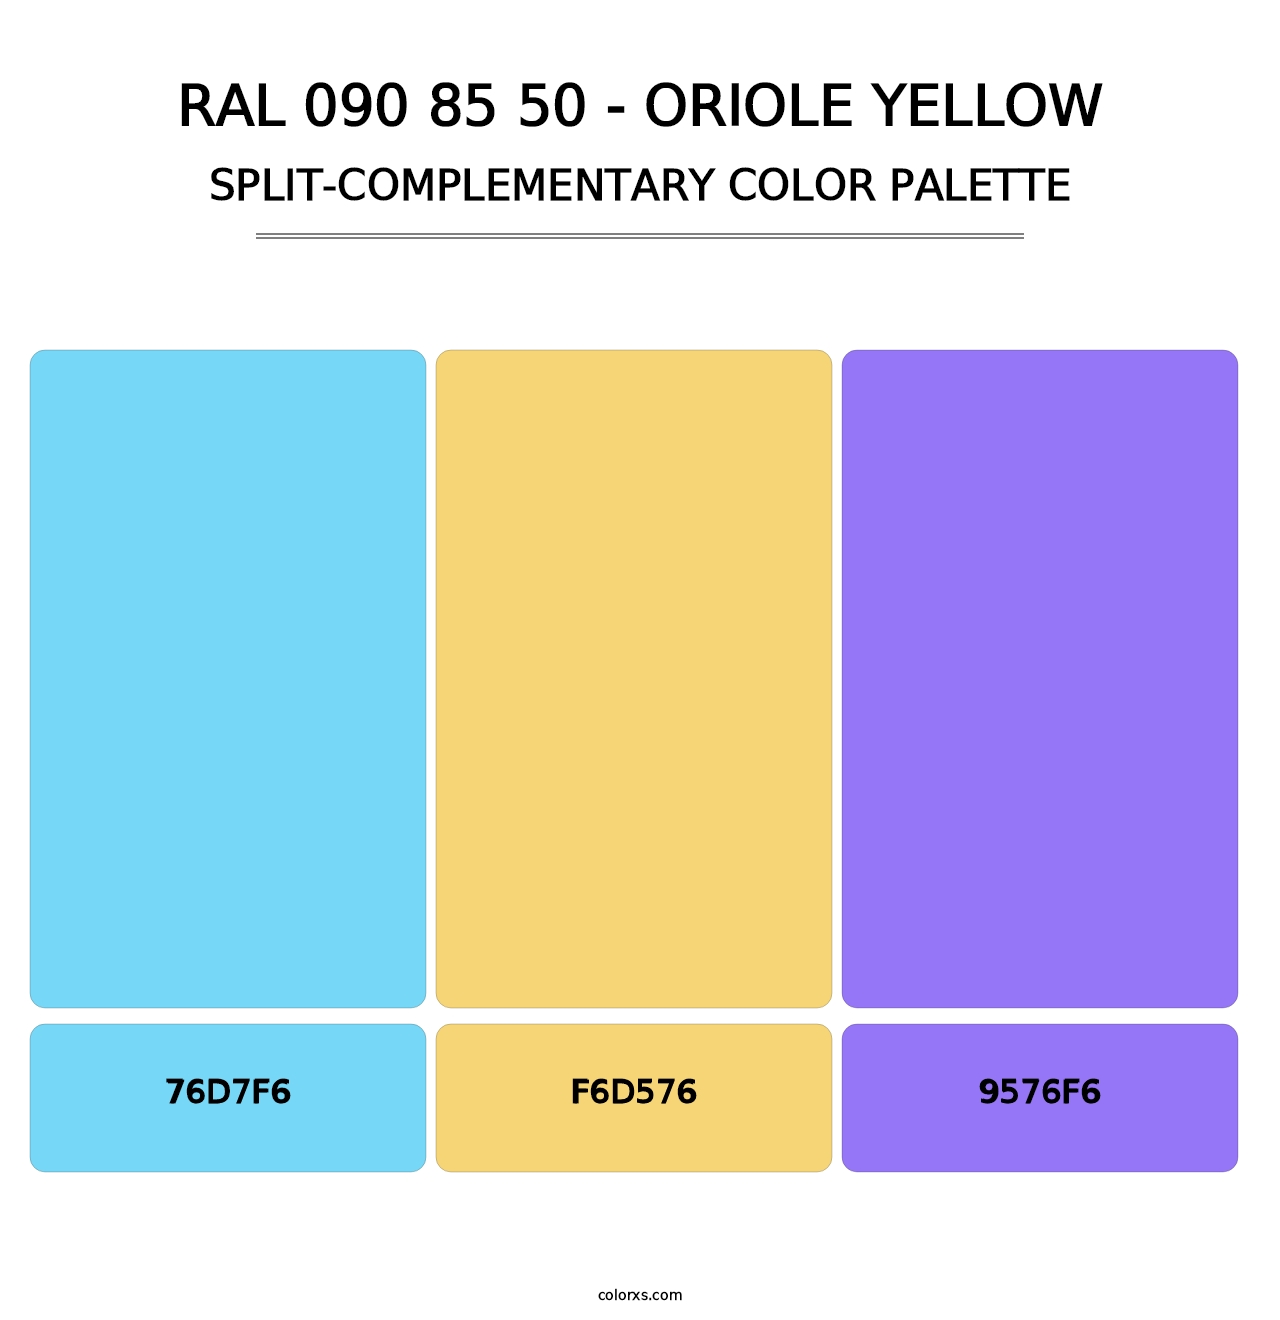 RAL 090 85 50 - Oriole Yellow - Split-Complementary Color Palette